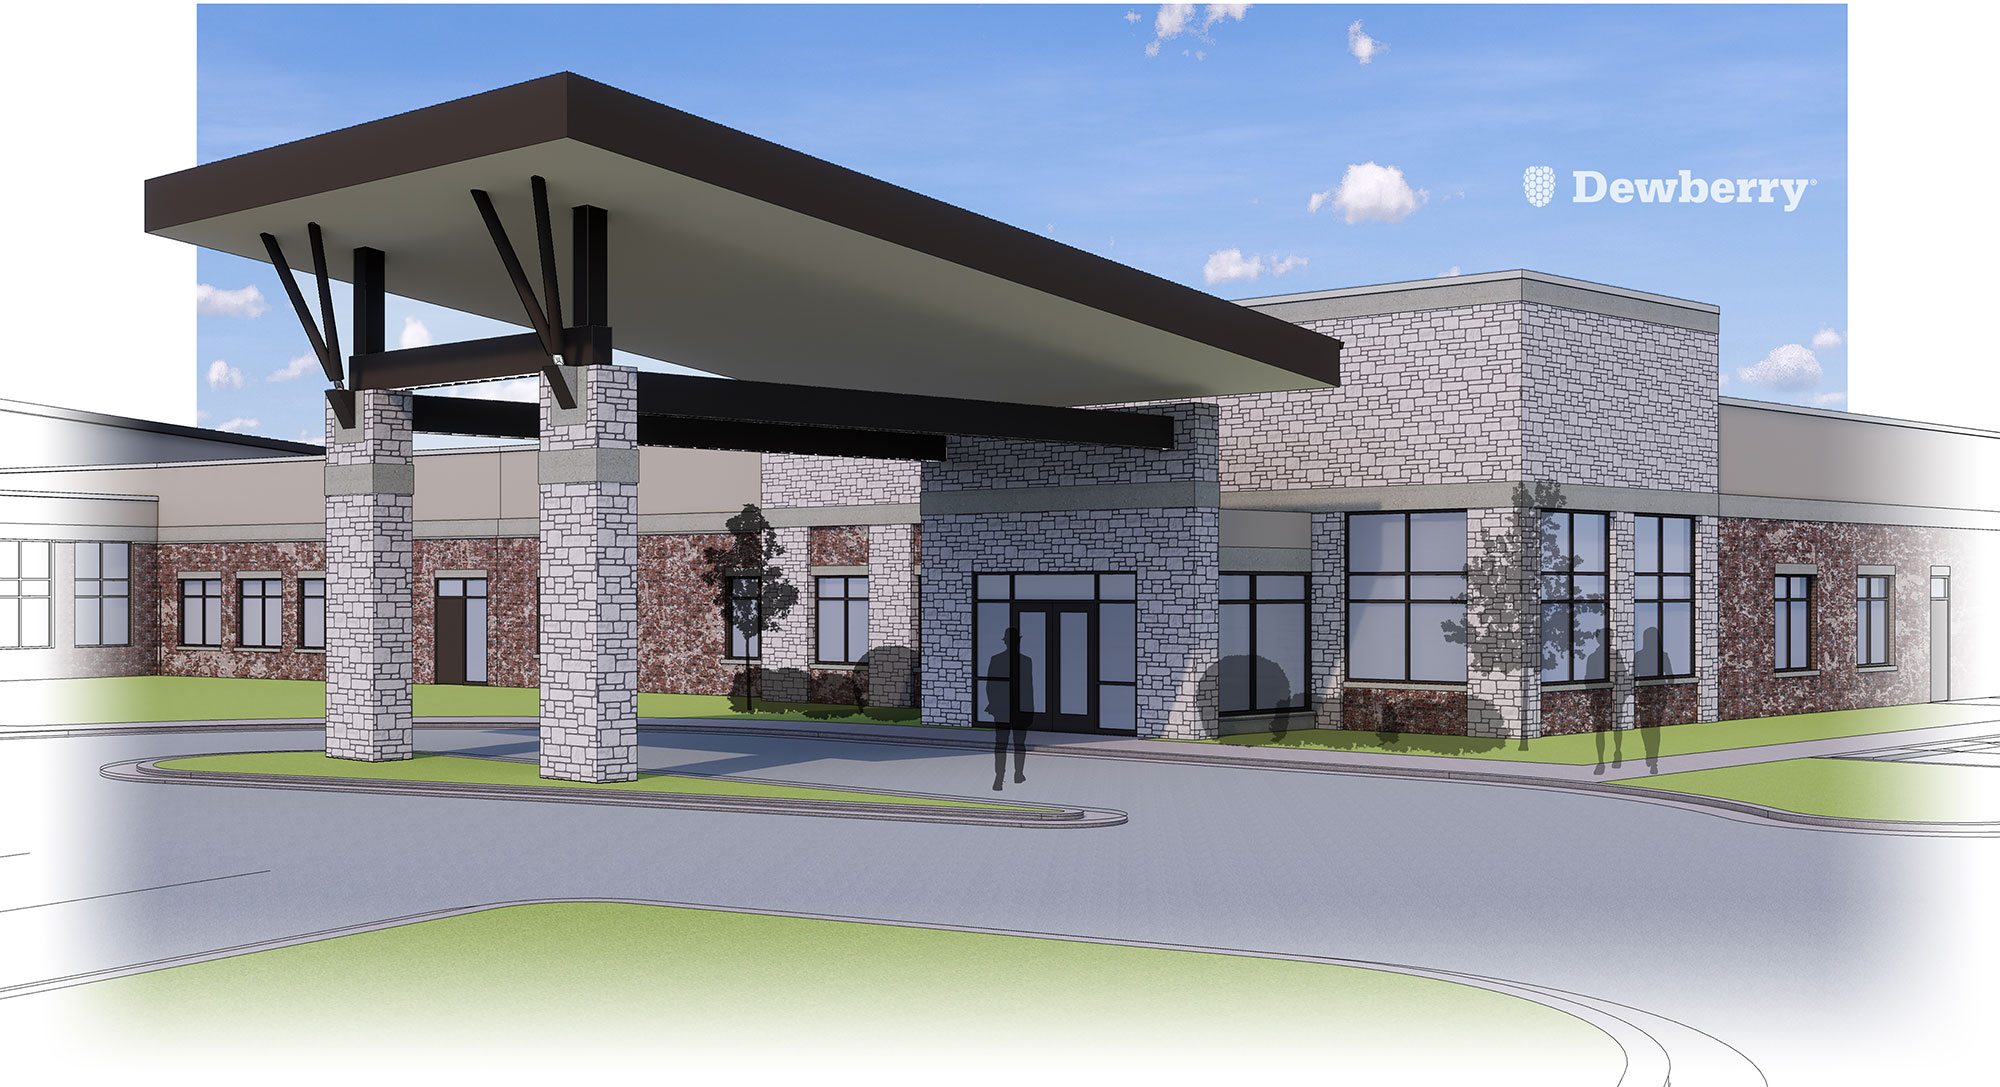 The new SoundMind Behavioral Health Hospital will open in Broken Arrow, Oklahoma, in 2021. Rendering courtesy of Dewberry.